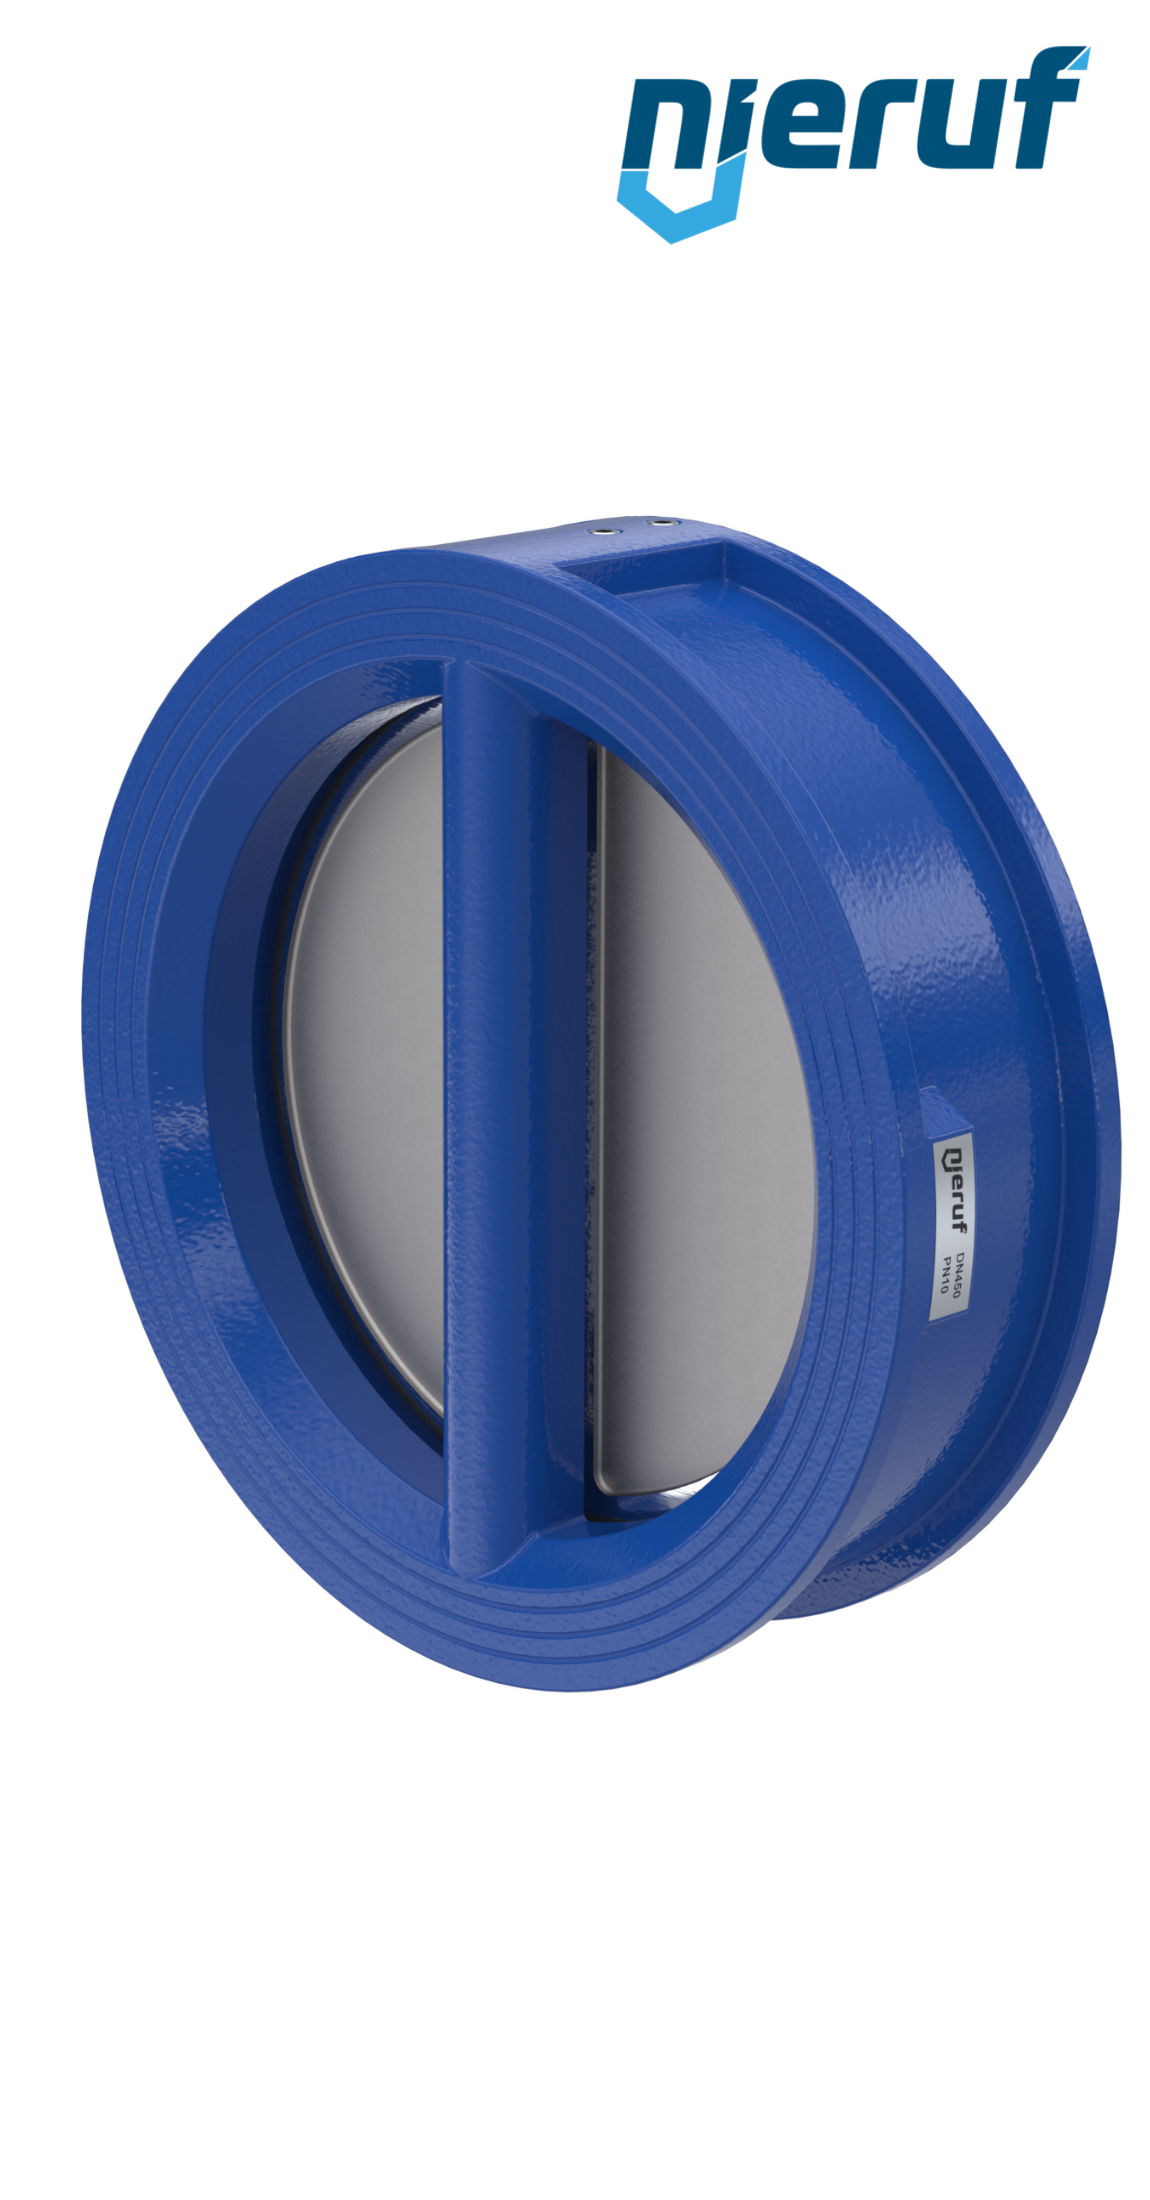 dual plate check valve DN450 DR02 GGG40 epoxyd plated blue 180µm EPDM